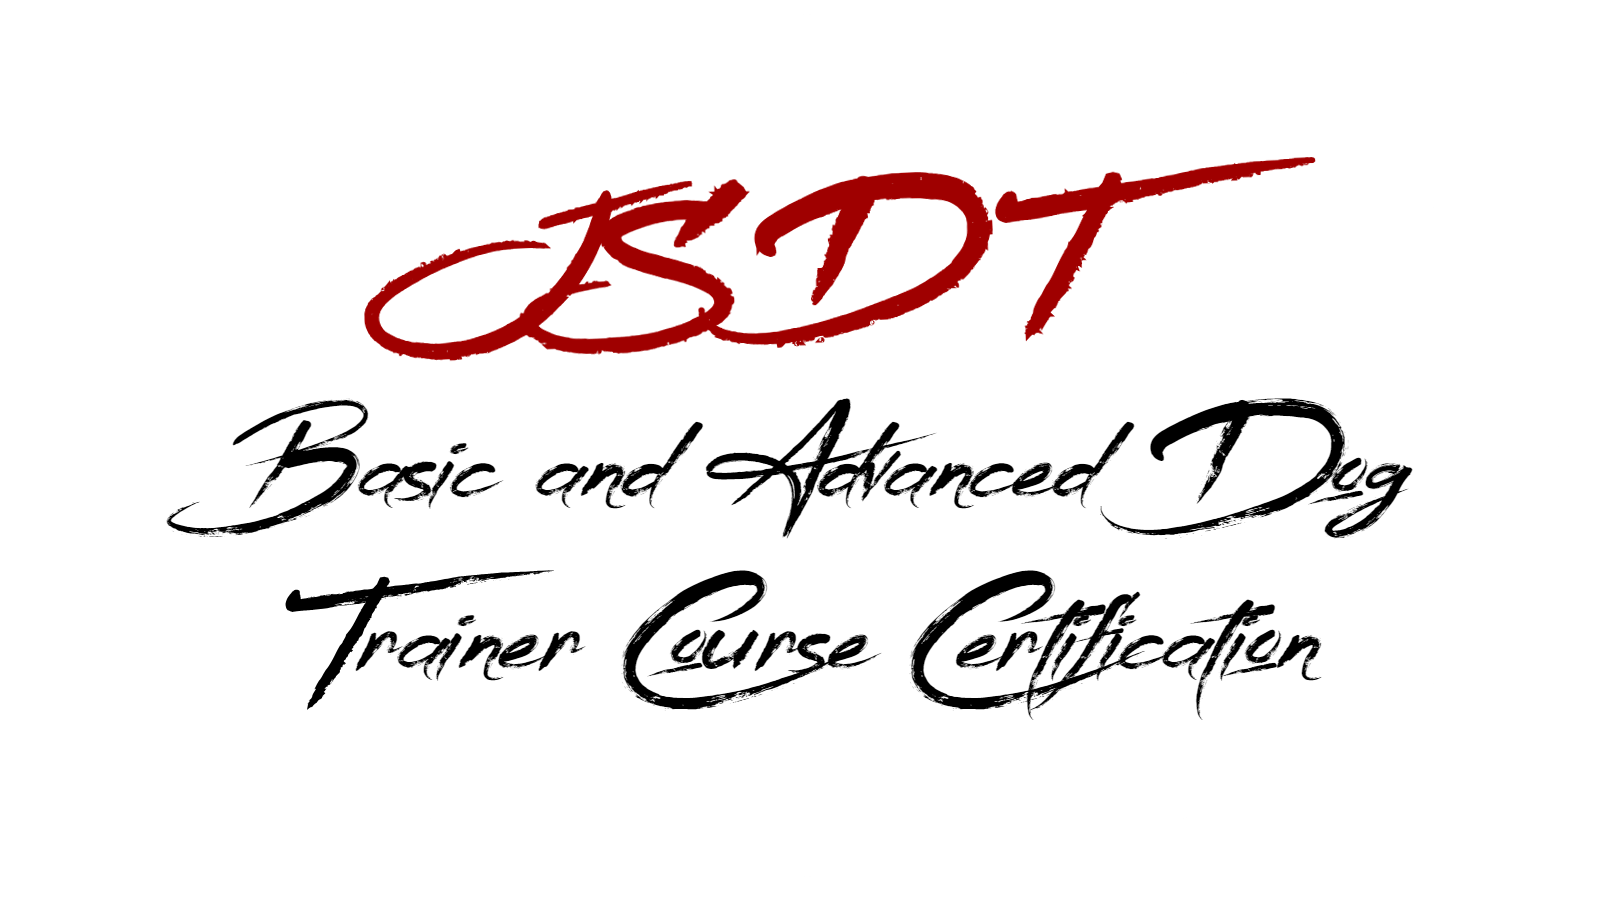 joel silvermans basic and advanced dog trainer certification courses